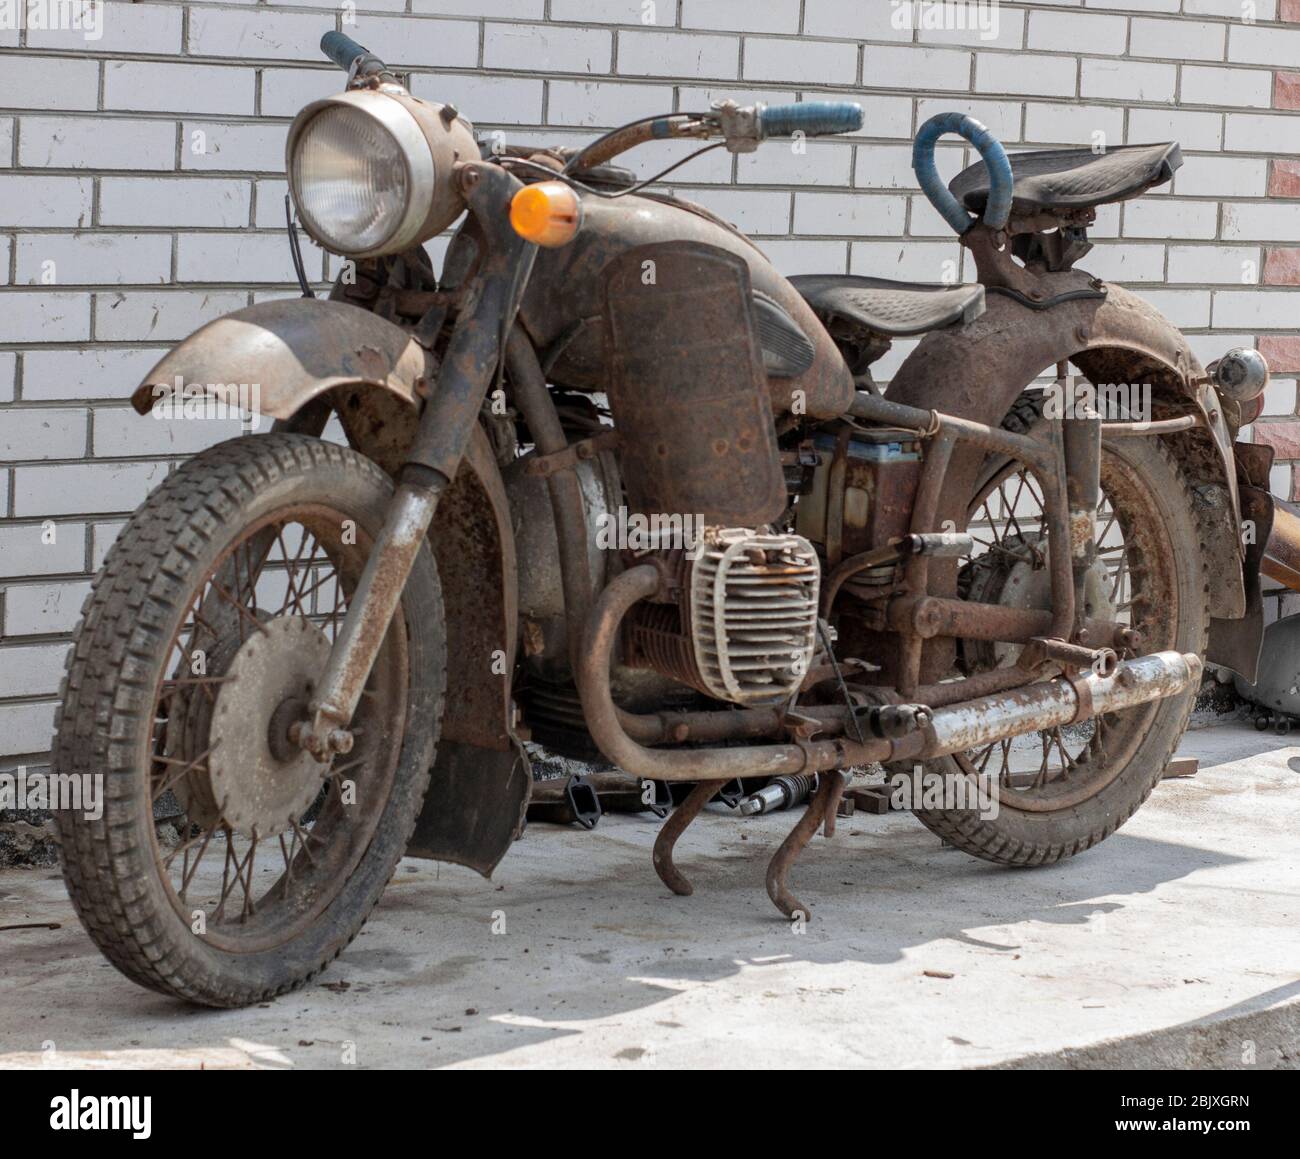 Retro moto, old antique bike covered with rust Stock Photo - Alamy